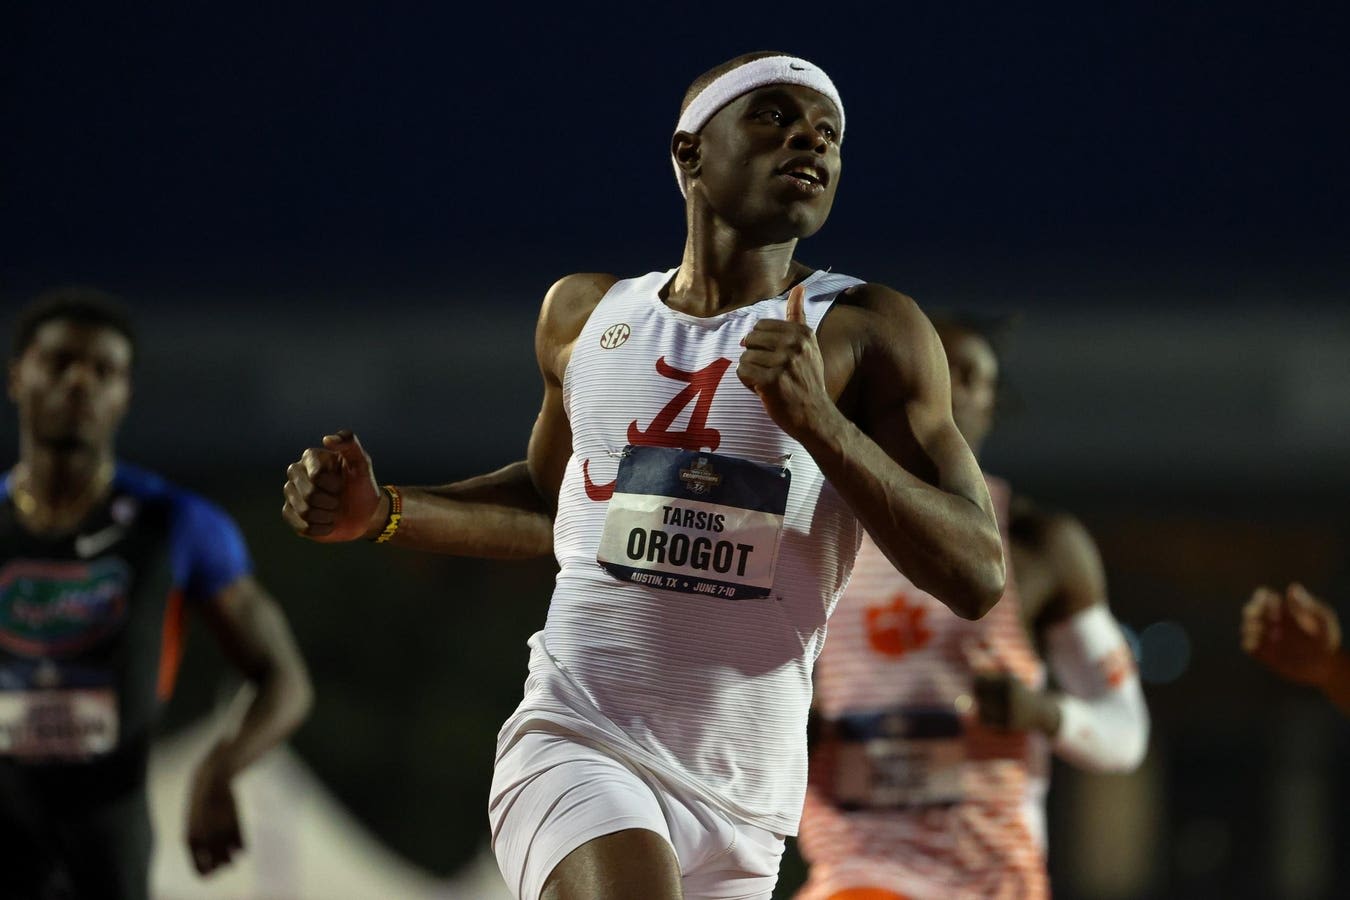 SEC Track And Field Championships Produce World Leading Times And Olympic Performances